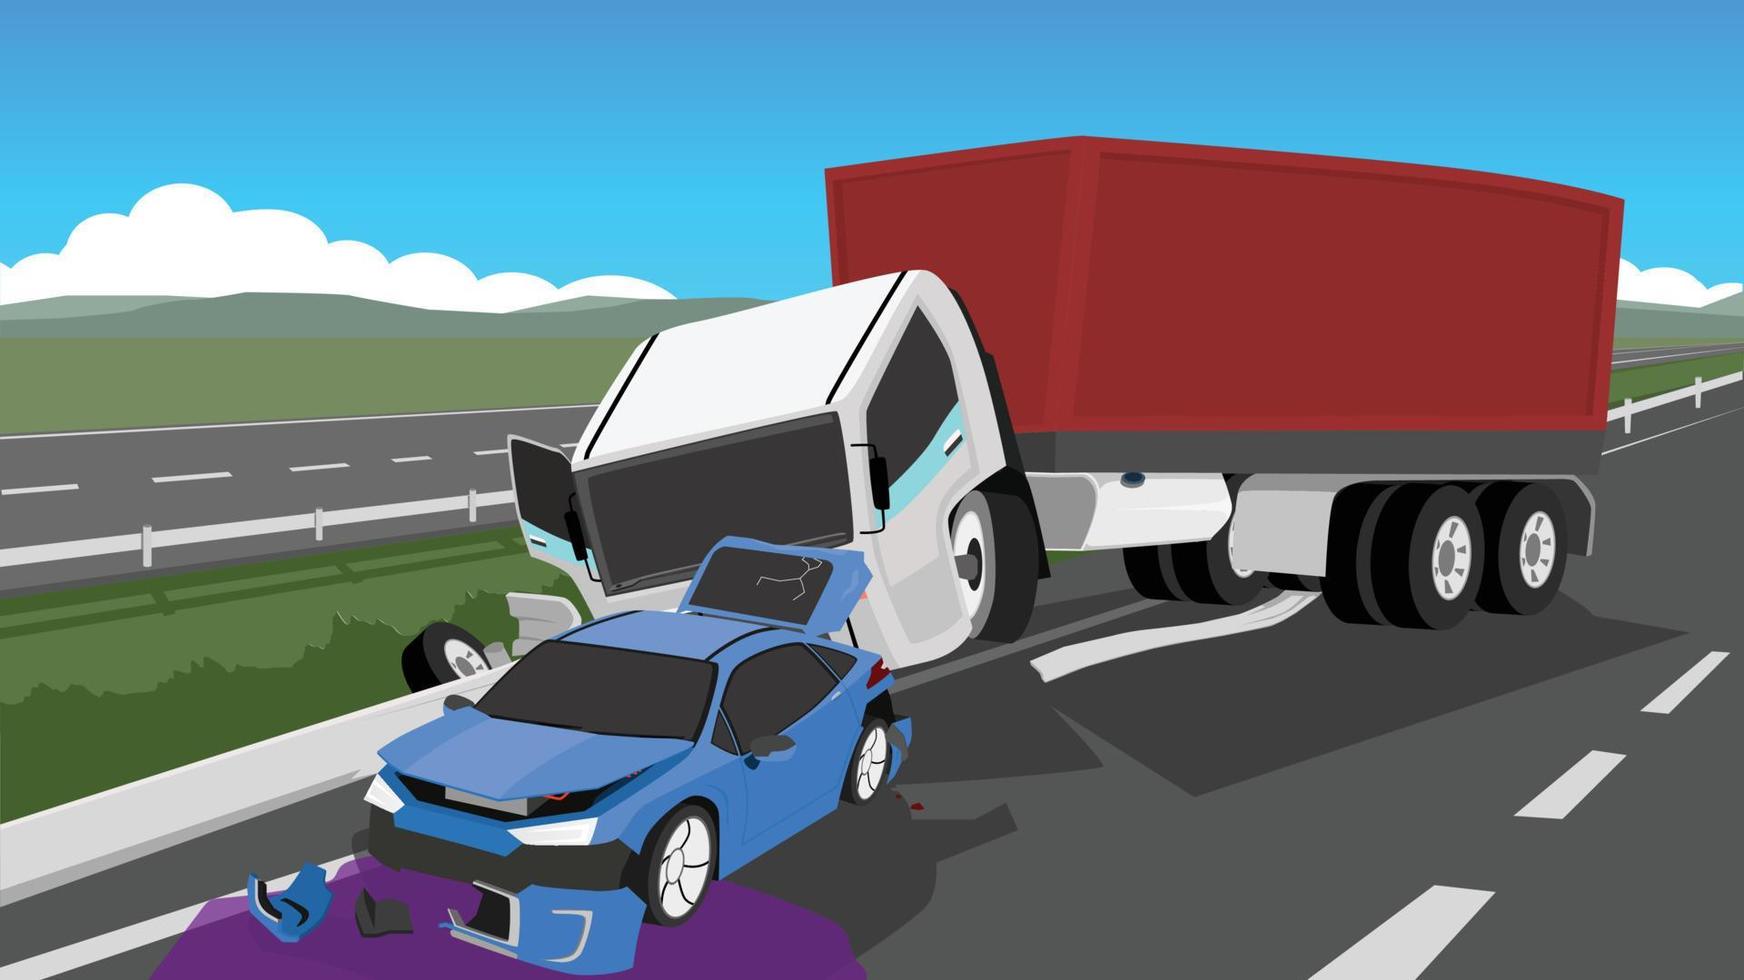 Accident of a container truck blocking the asphalt road. Clash on the edge of the road and at the end of a passenger car. oil spill on road. Parallel routes in the area connecting the cities. vector